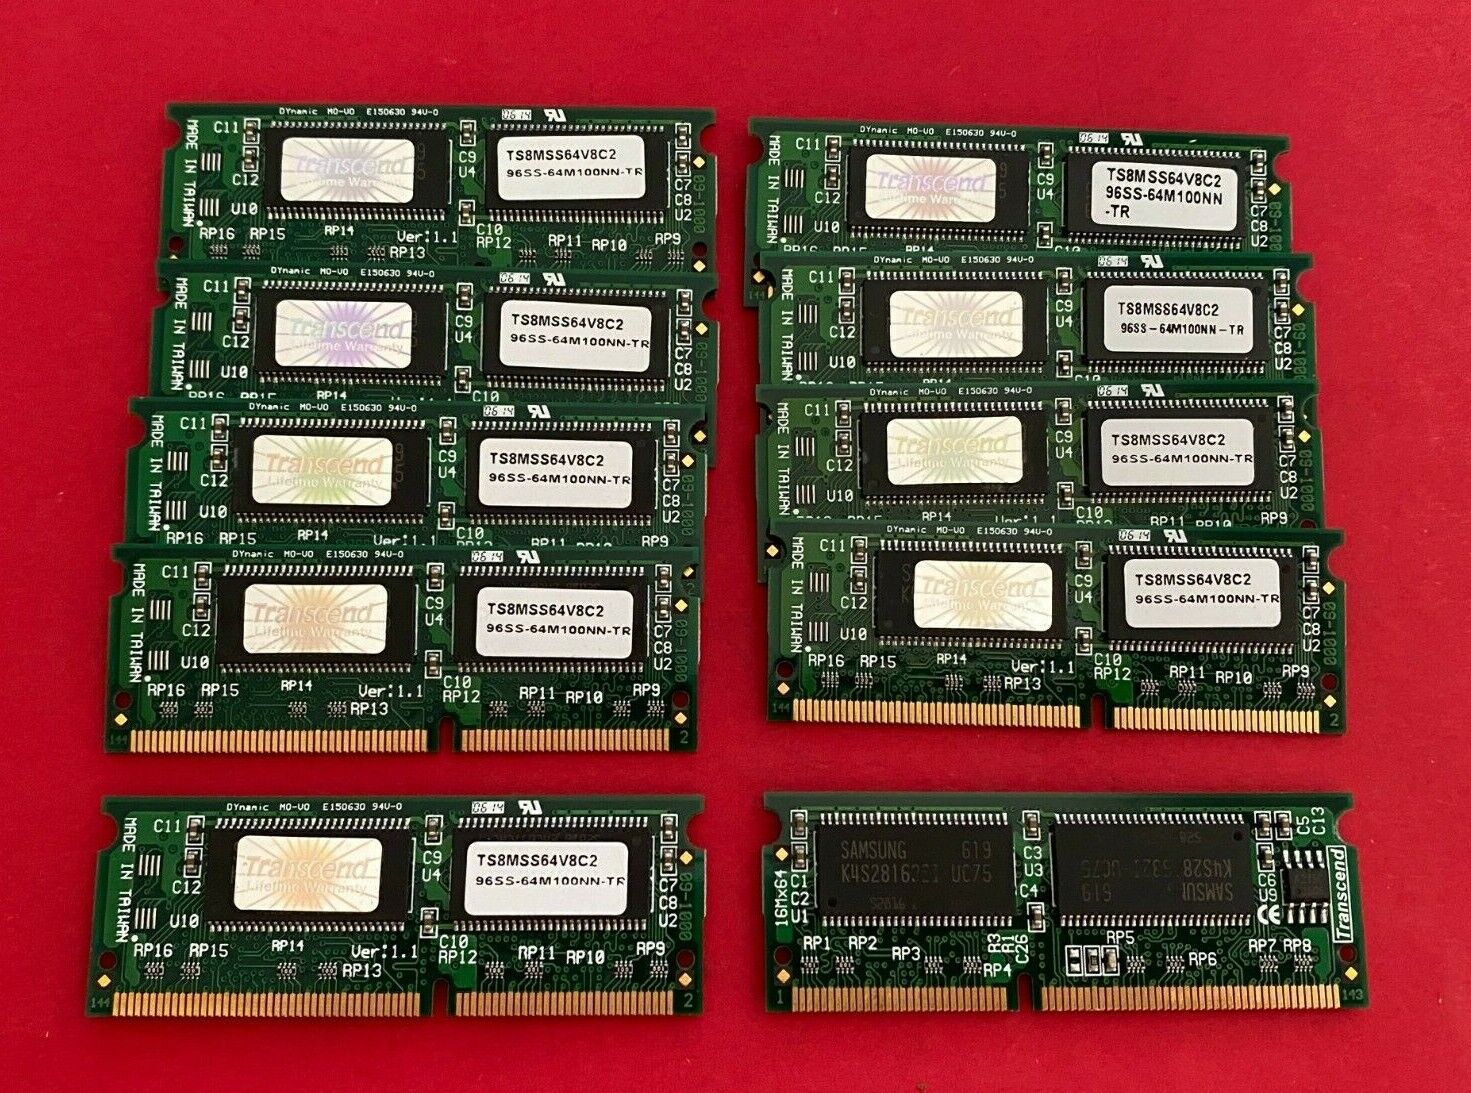 Transcend TS8MSS64V8C2 144PIN PC100 Unbuffered DIMM 64MB With 8Mx16 CL2, 10pcLot